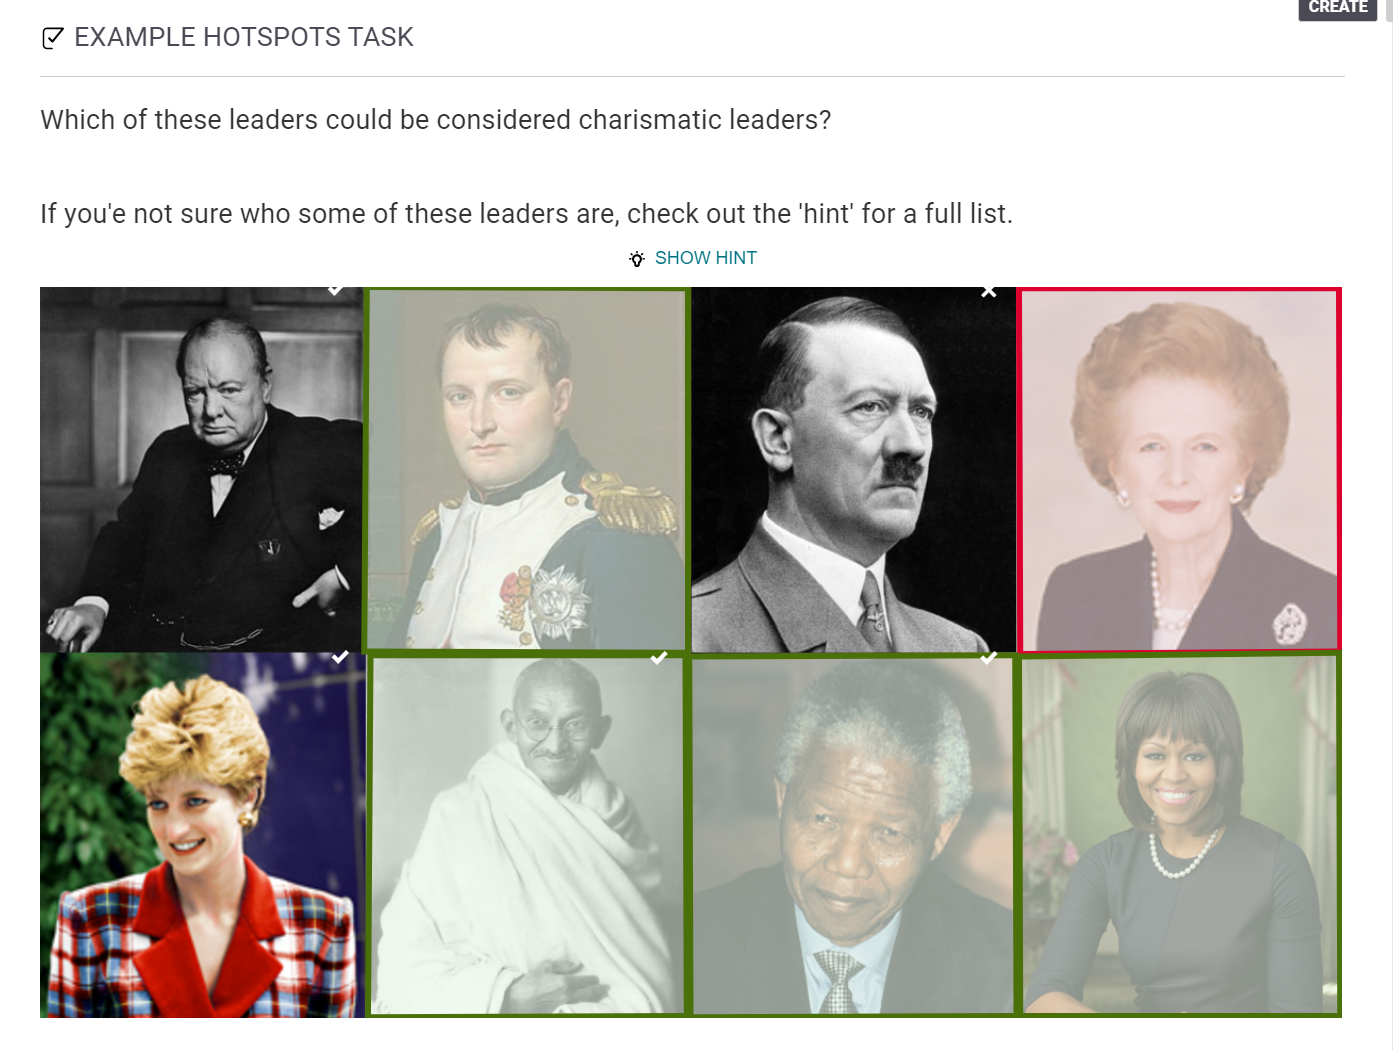 Hotspots tasks with pictures of famous leaders where learners are asked to select which of the leaders would be considered charismatic leaders.